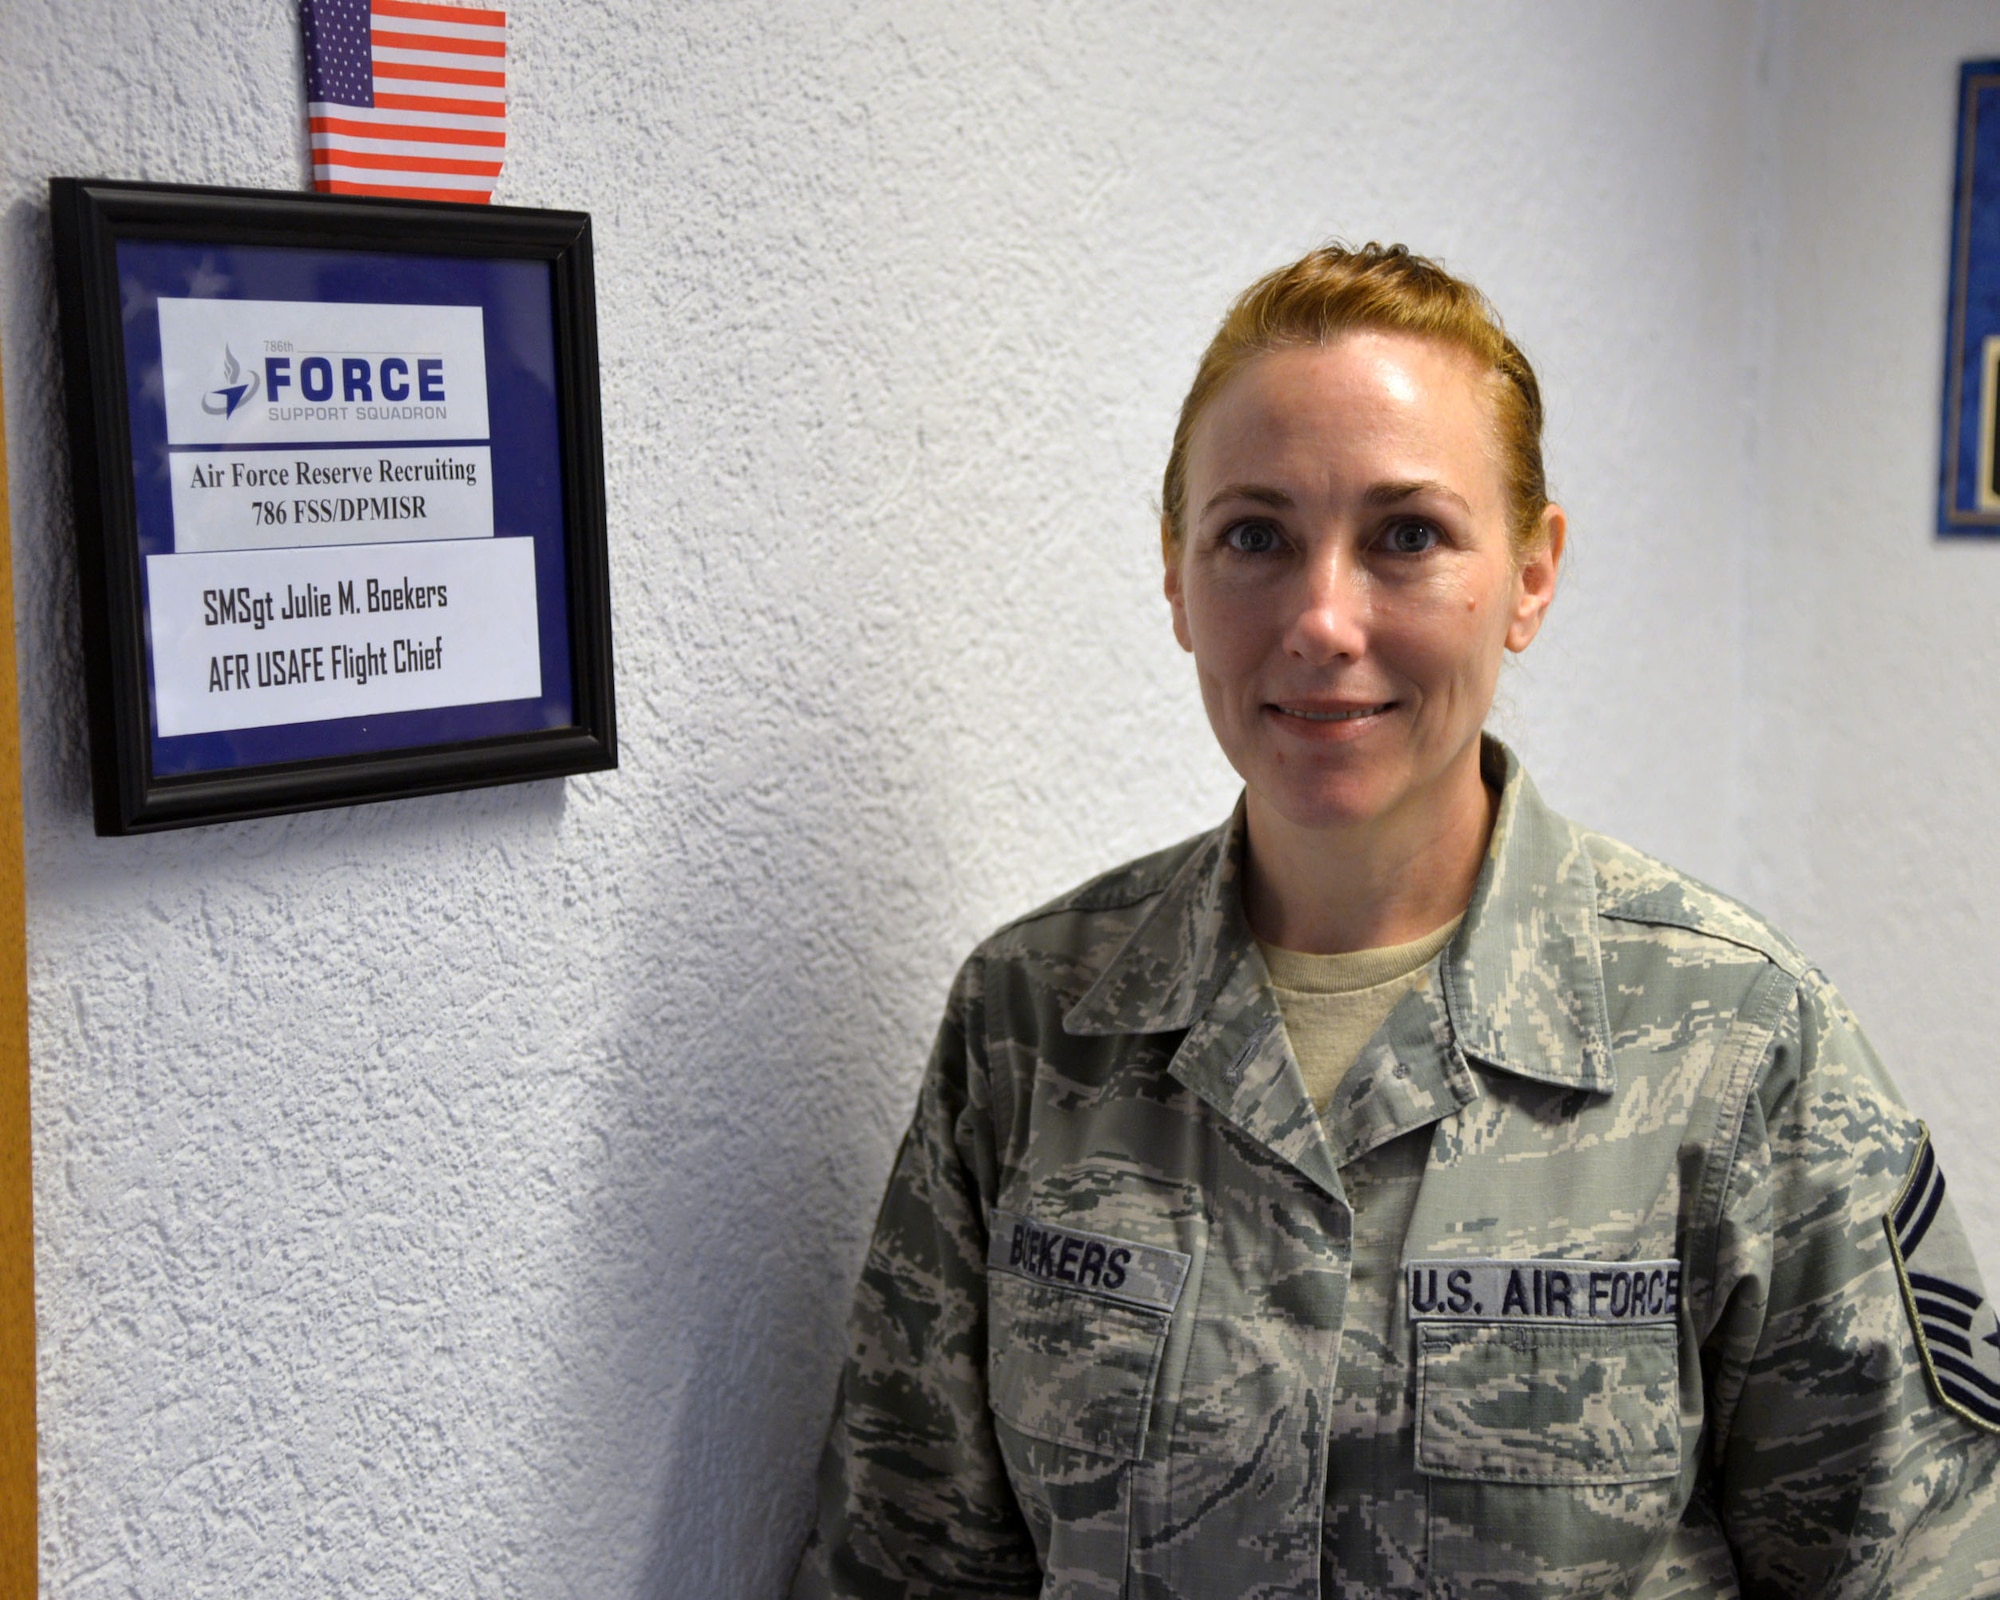 Senior Master Sgt. Julie Boekers has been an Air Force Reserve Recruiter since 2006. She said being a recruiter is an enormous responsibility, but if one of the most rewarding assignments of her career. (U.S. Air Force photo by Staff Sgt. Tory Patterson)